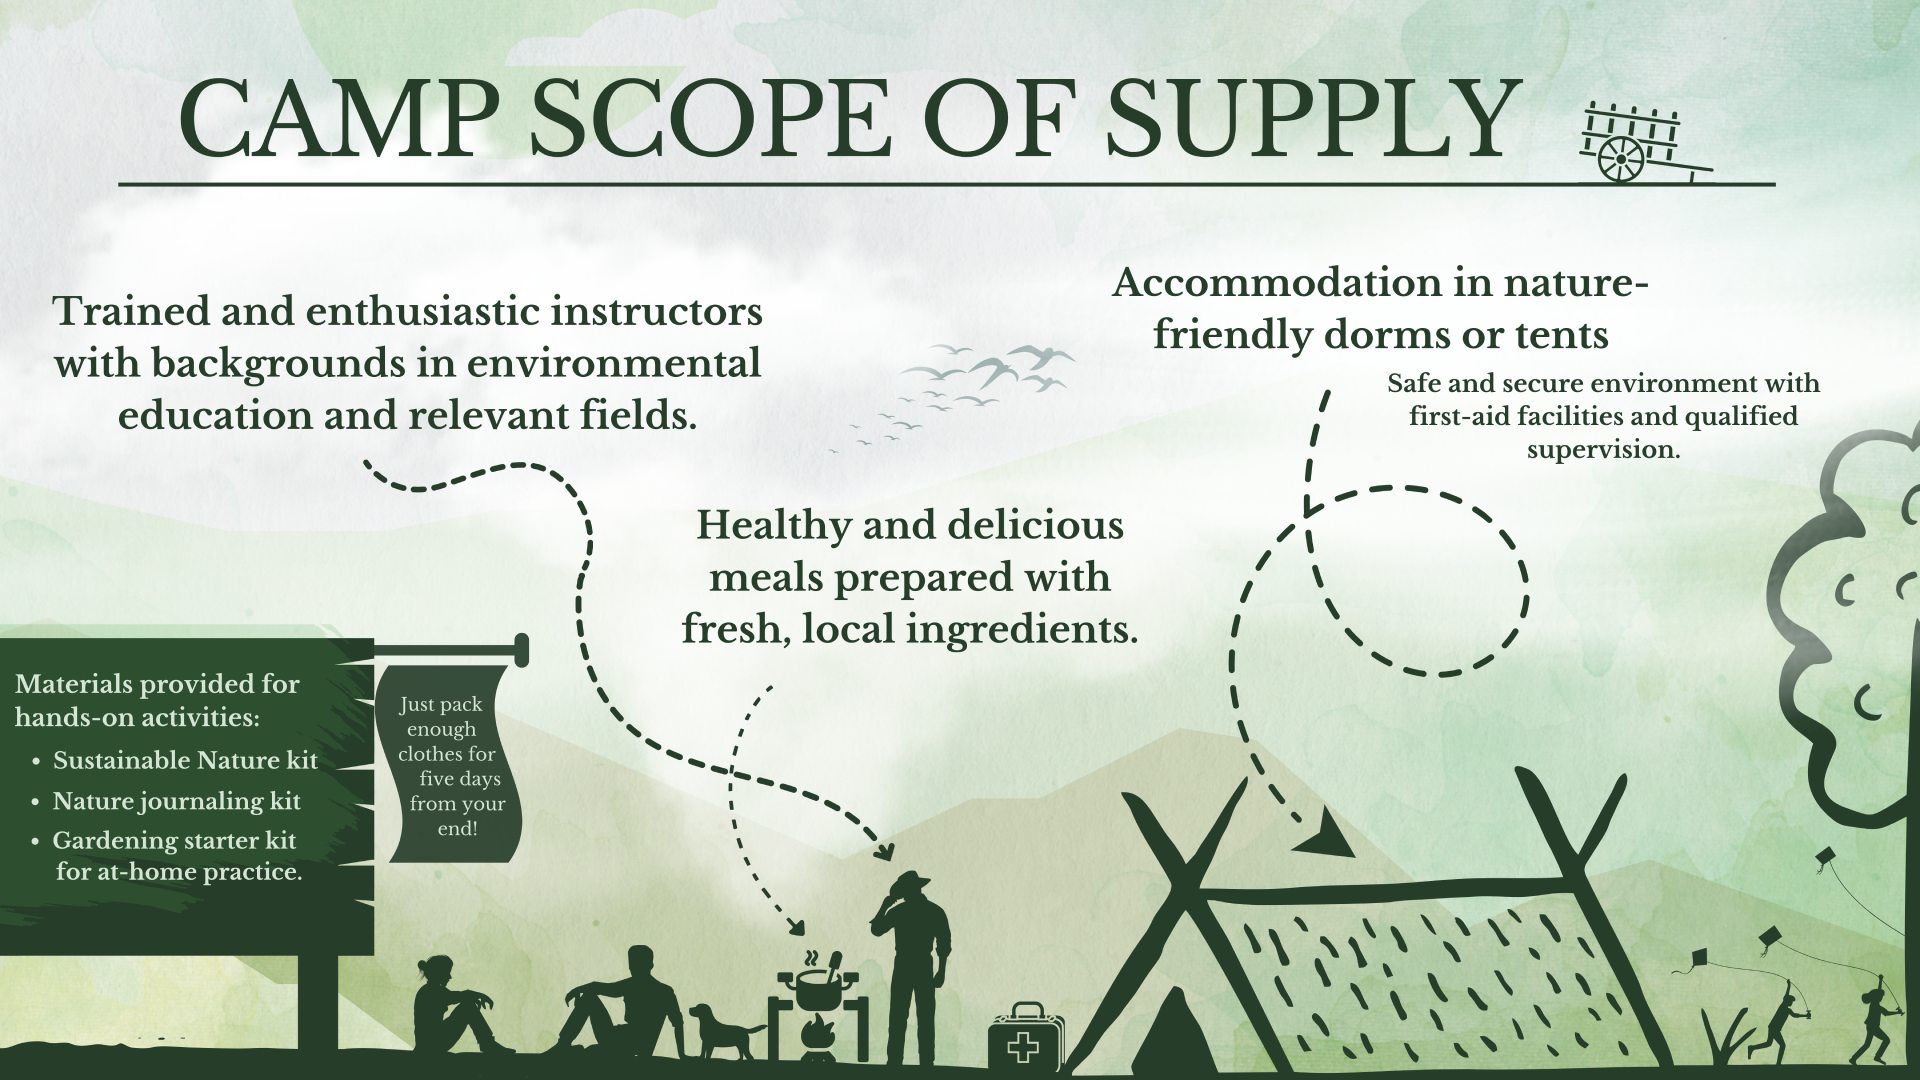 Information regarding the Camp Scope of Supply